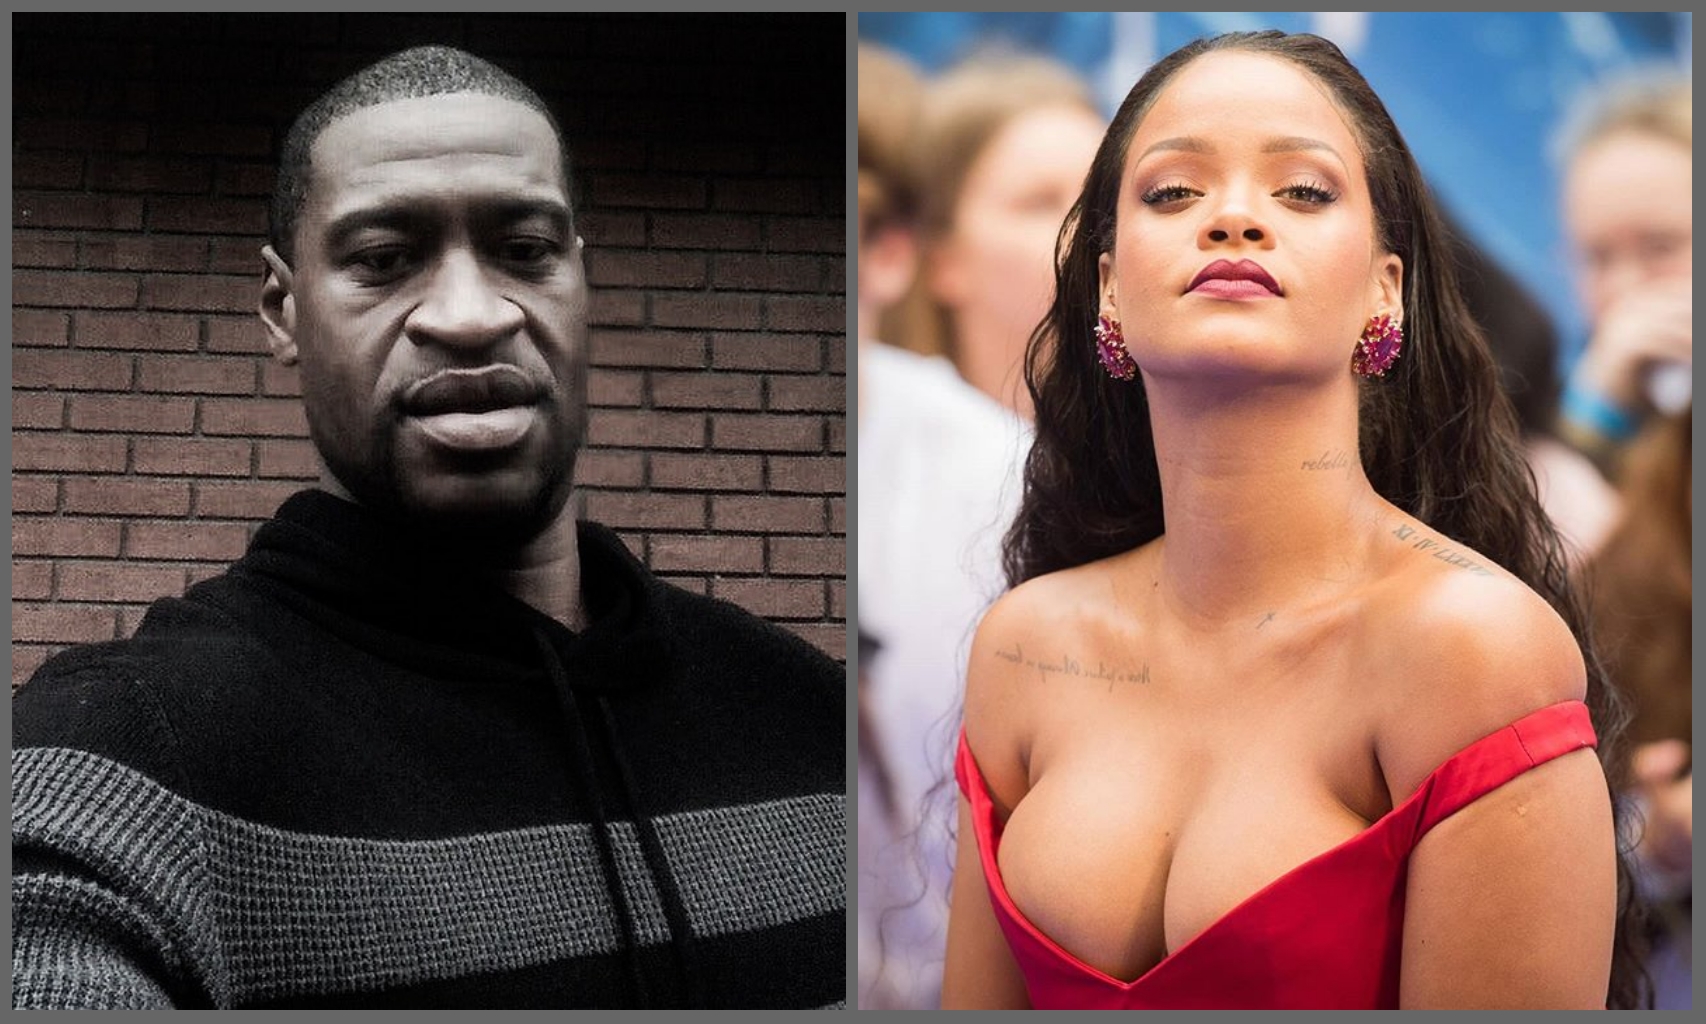 "I can't shake this" – Rihanna condemns murder of George Floyd